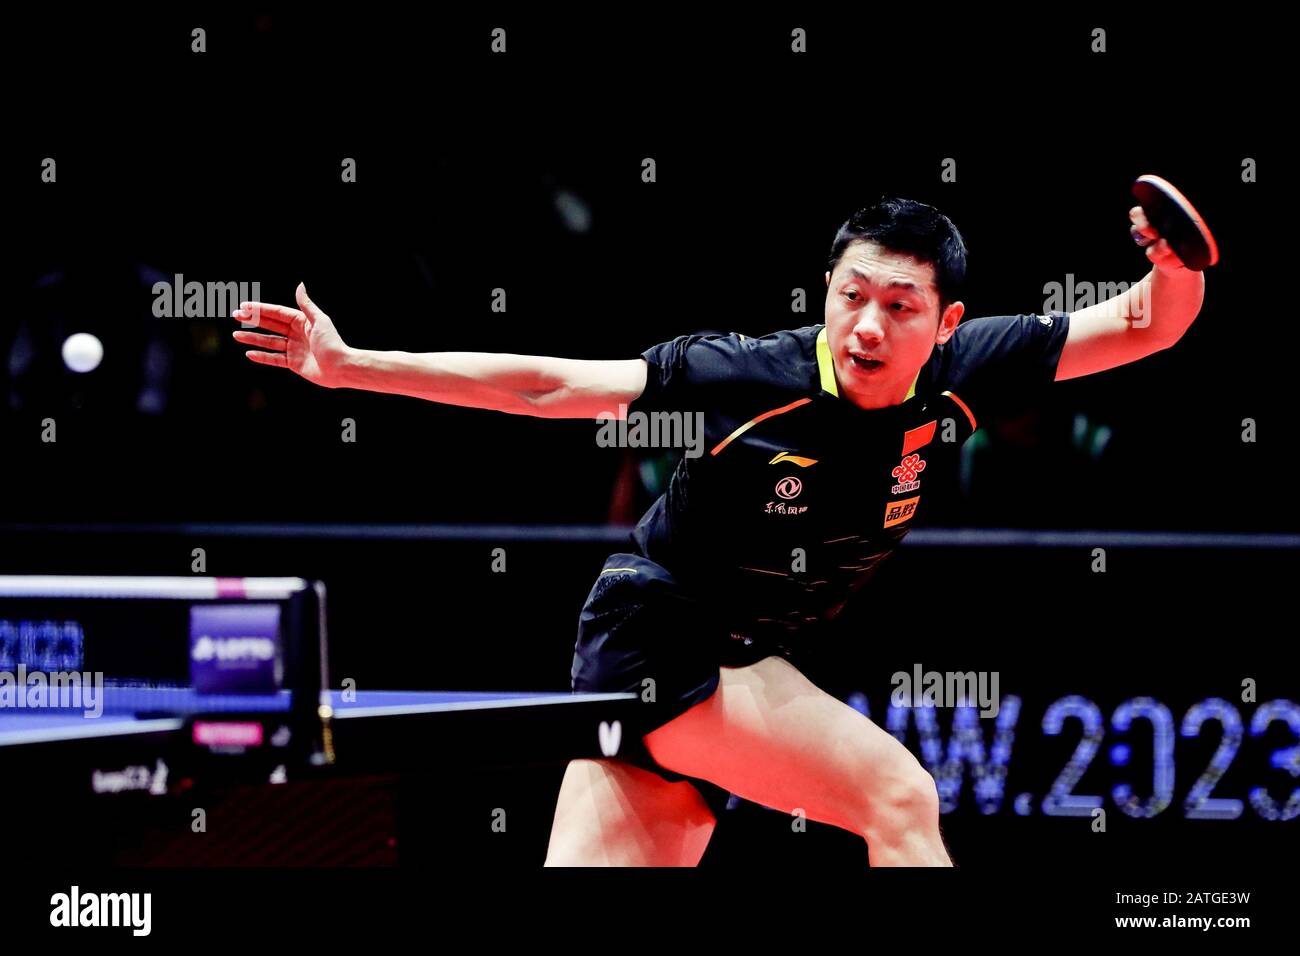 Magdeburg, Germany. 2nd Feb, 2020. Xu Xin of China competes during the  men's singles final match between Ma Long and Xu Xin of China at the 2020  ITTF World Tour Platinum German